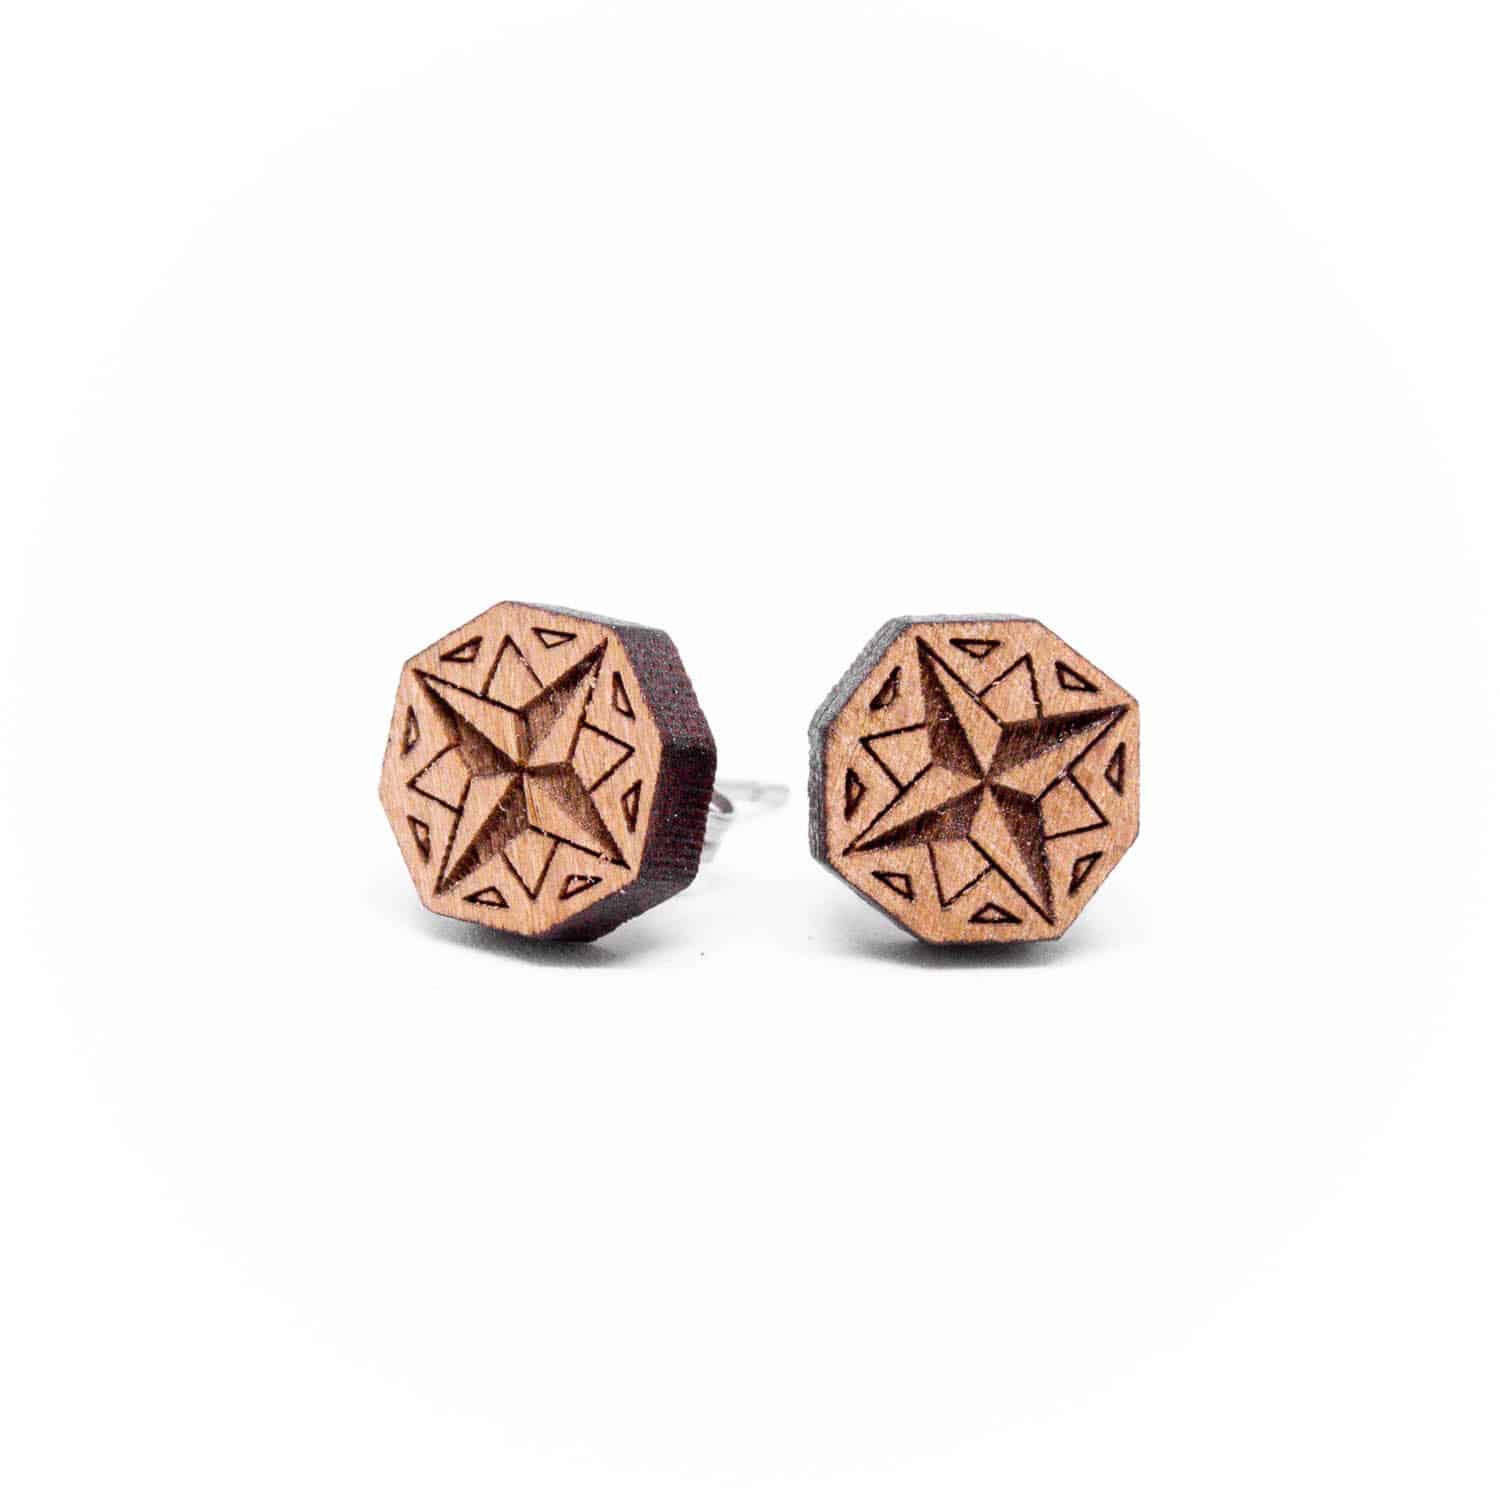 Nomad wooden ear studs for travelers